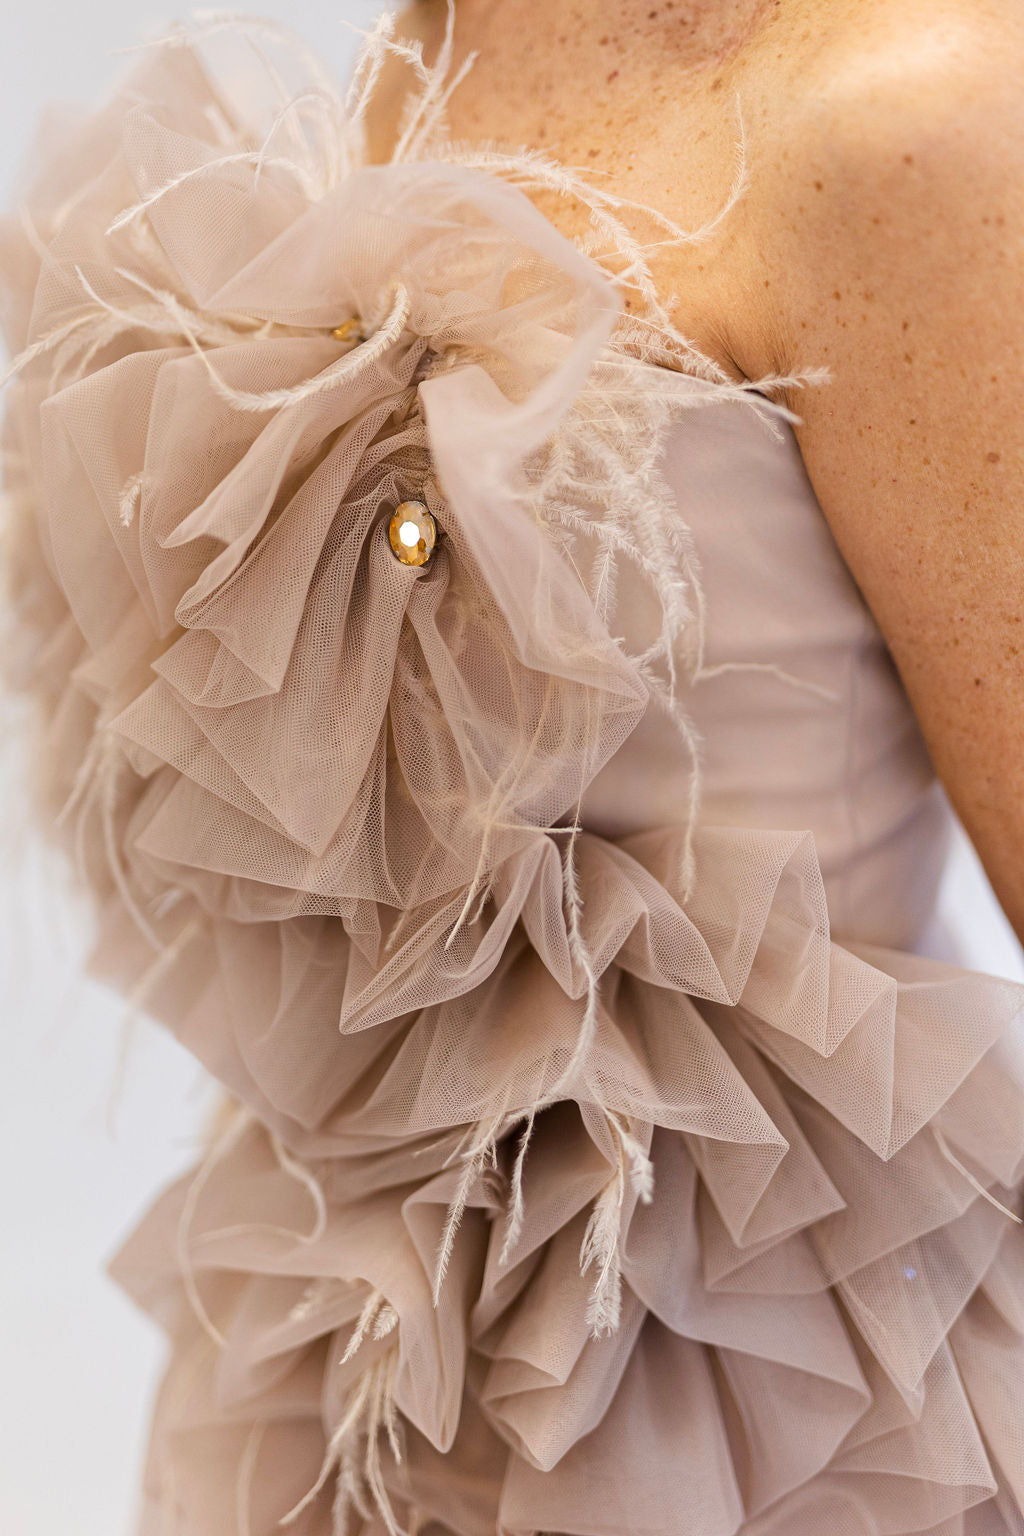 THE OVER THE TOP NUDE TULLE BALLGOWN